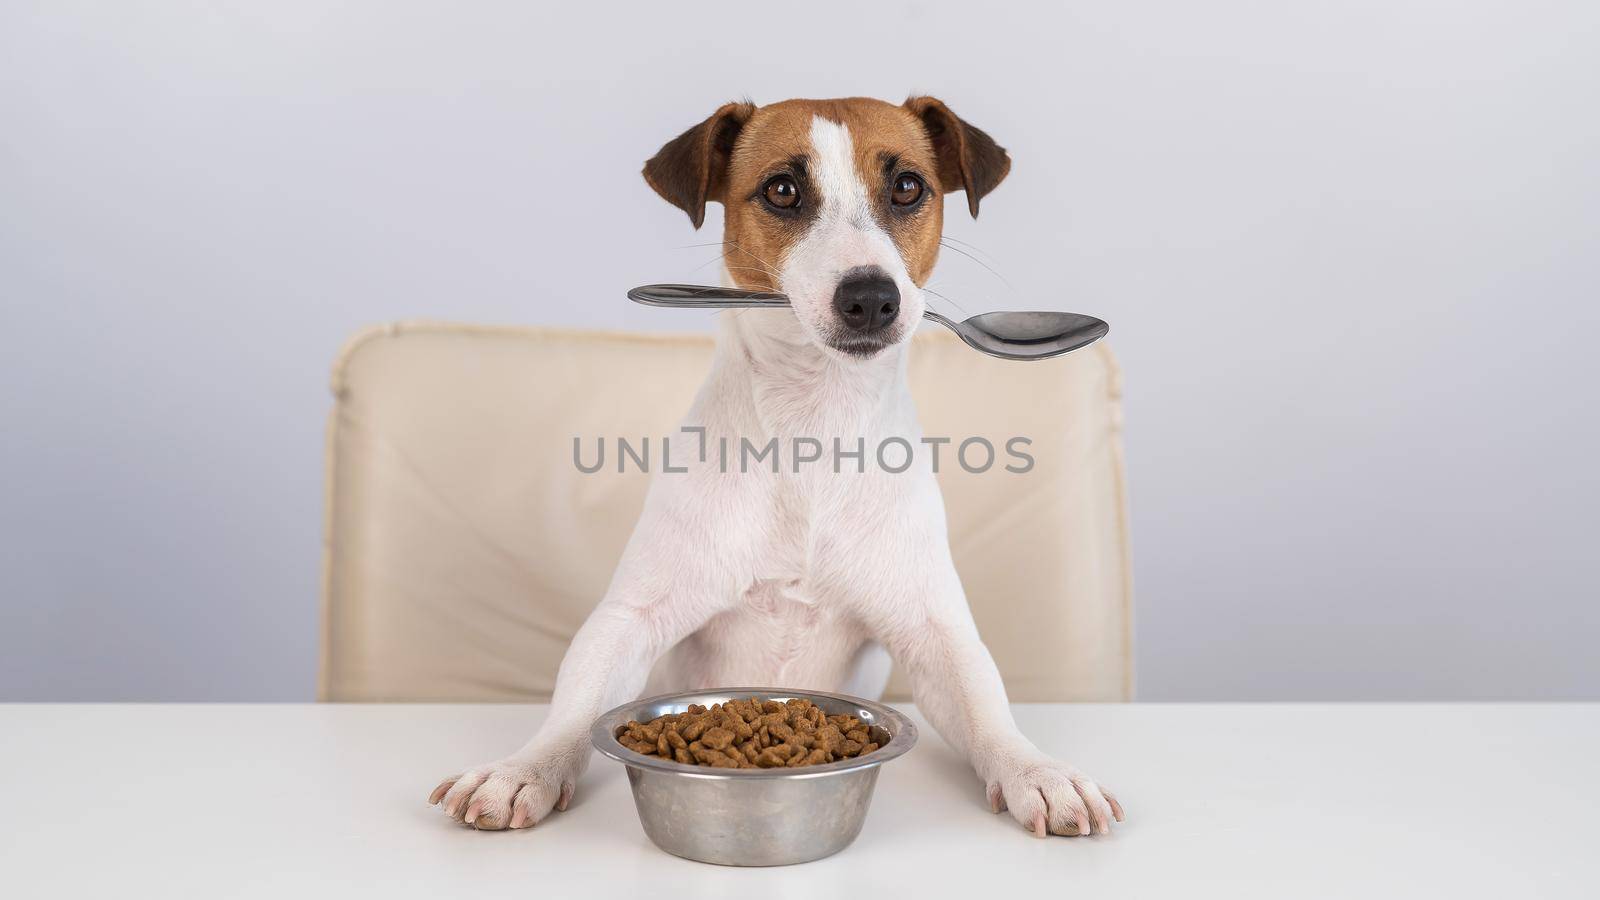 Jack Russell Terrier dog sits at a dinner table with a bowl of dry food and holds a spoon in his mouth. by mrwed54